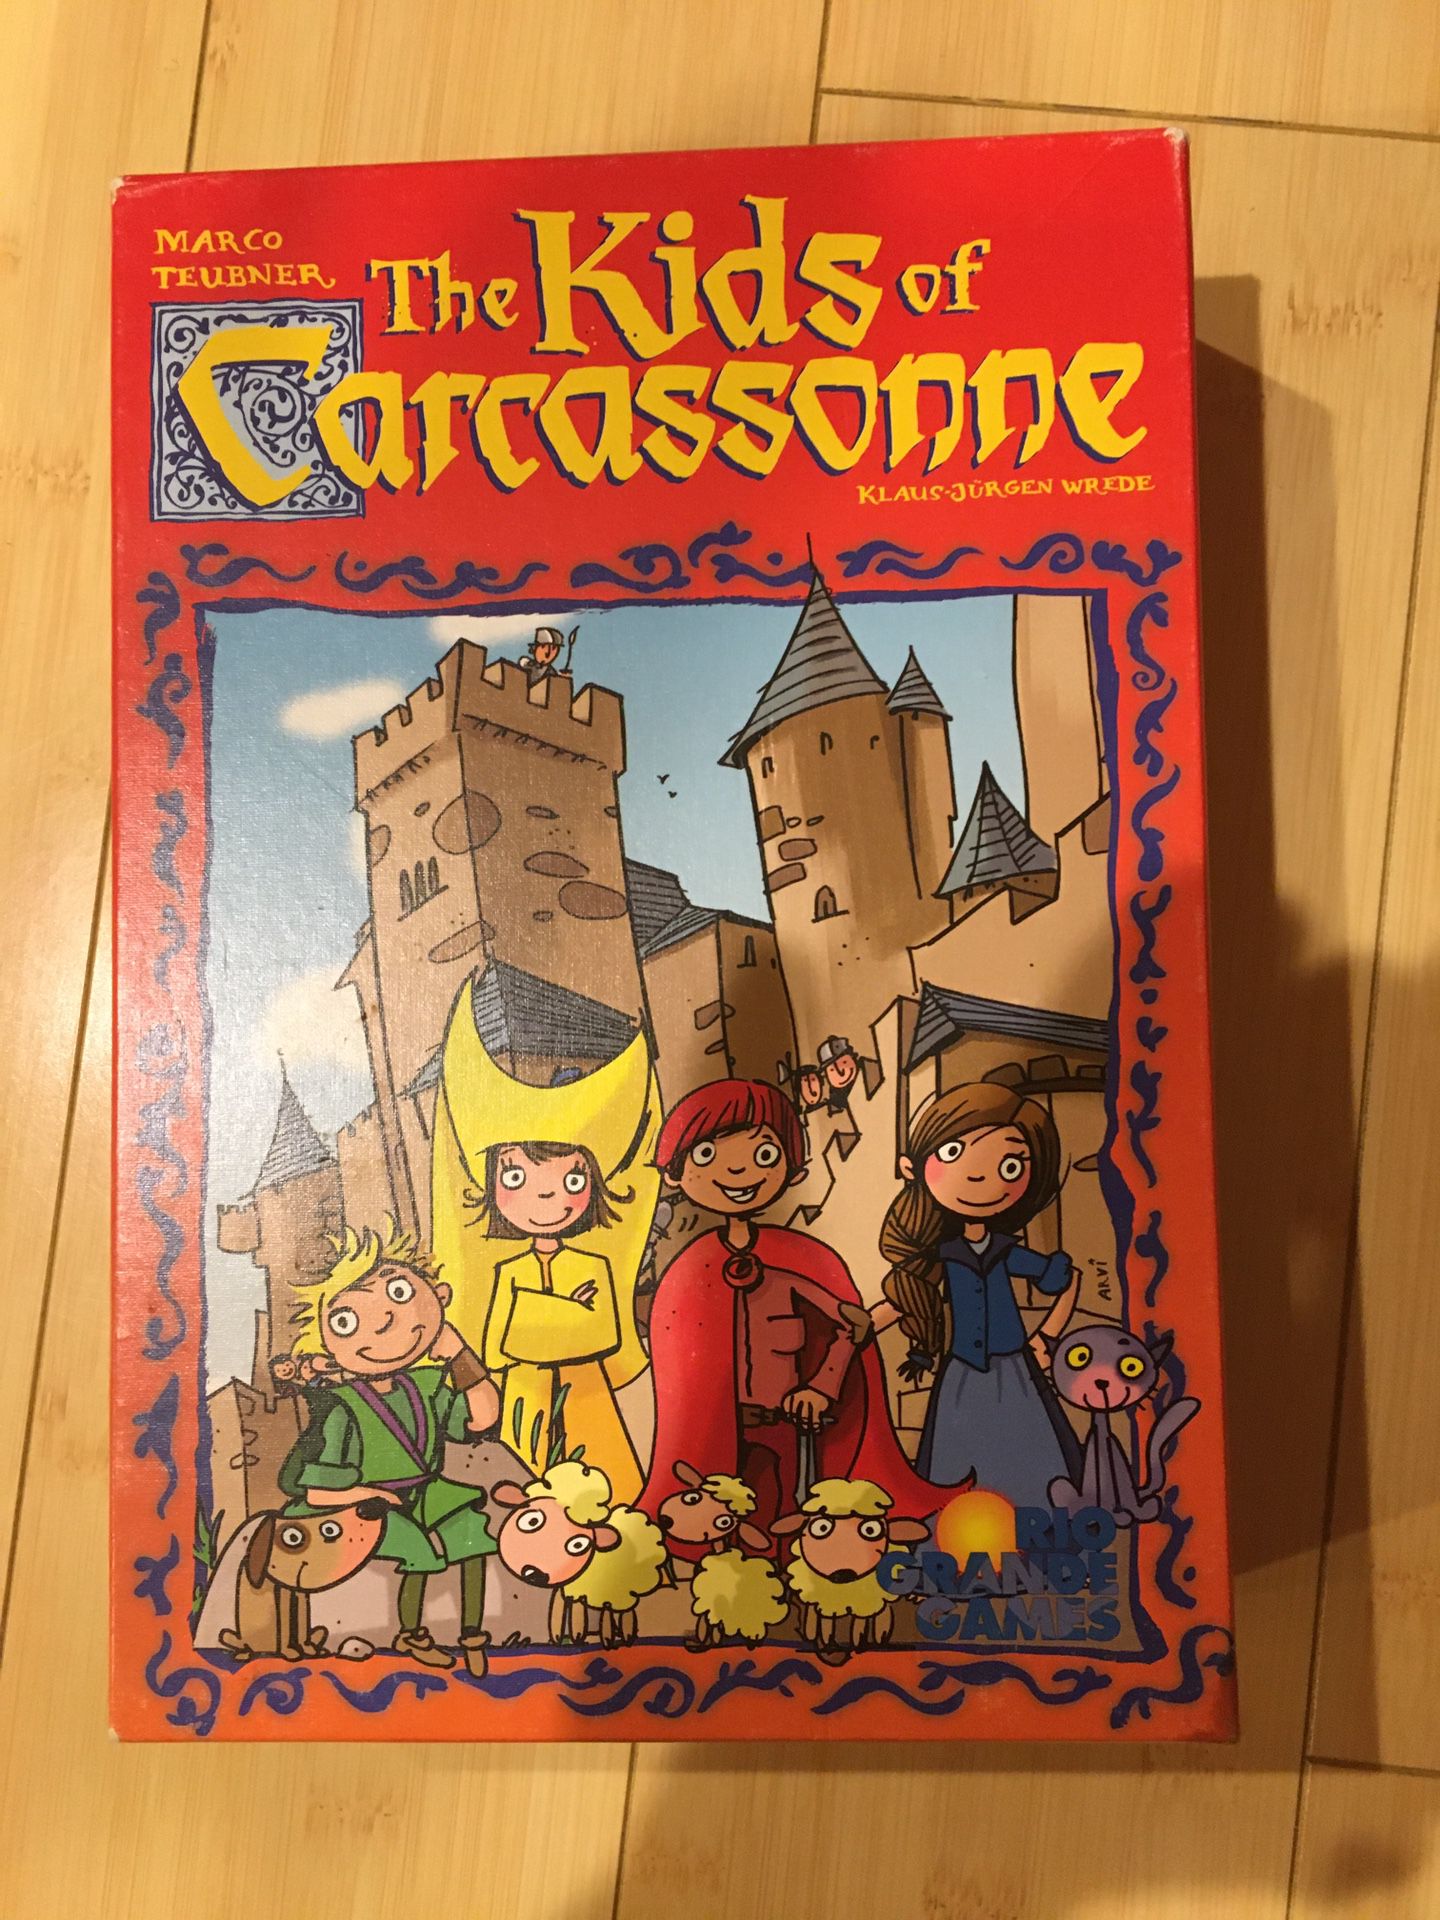 The kids of carcassone game